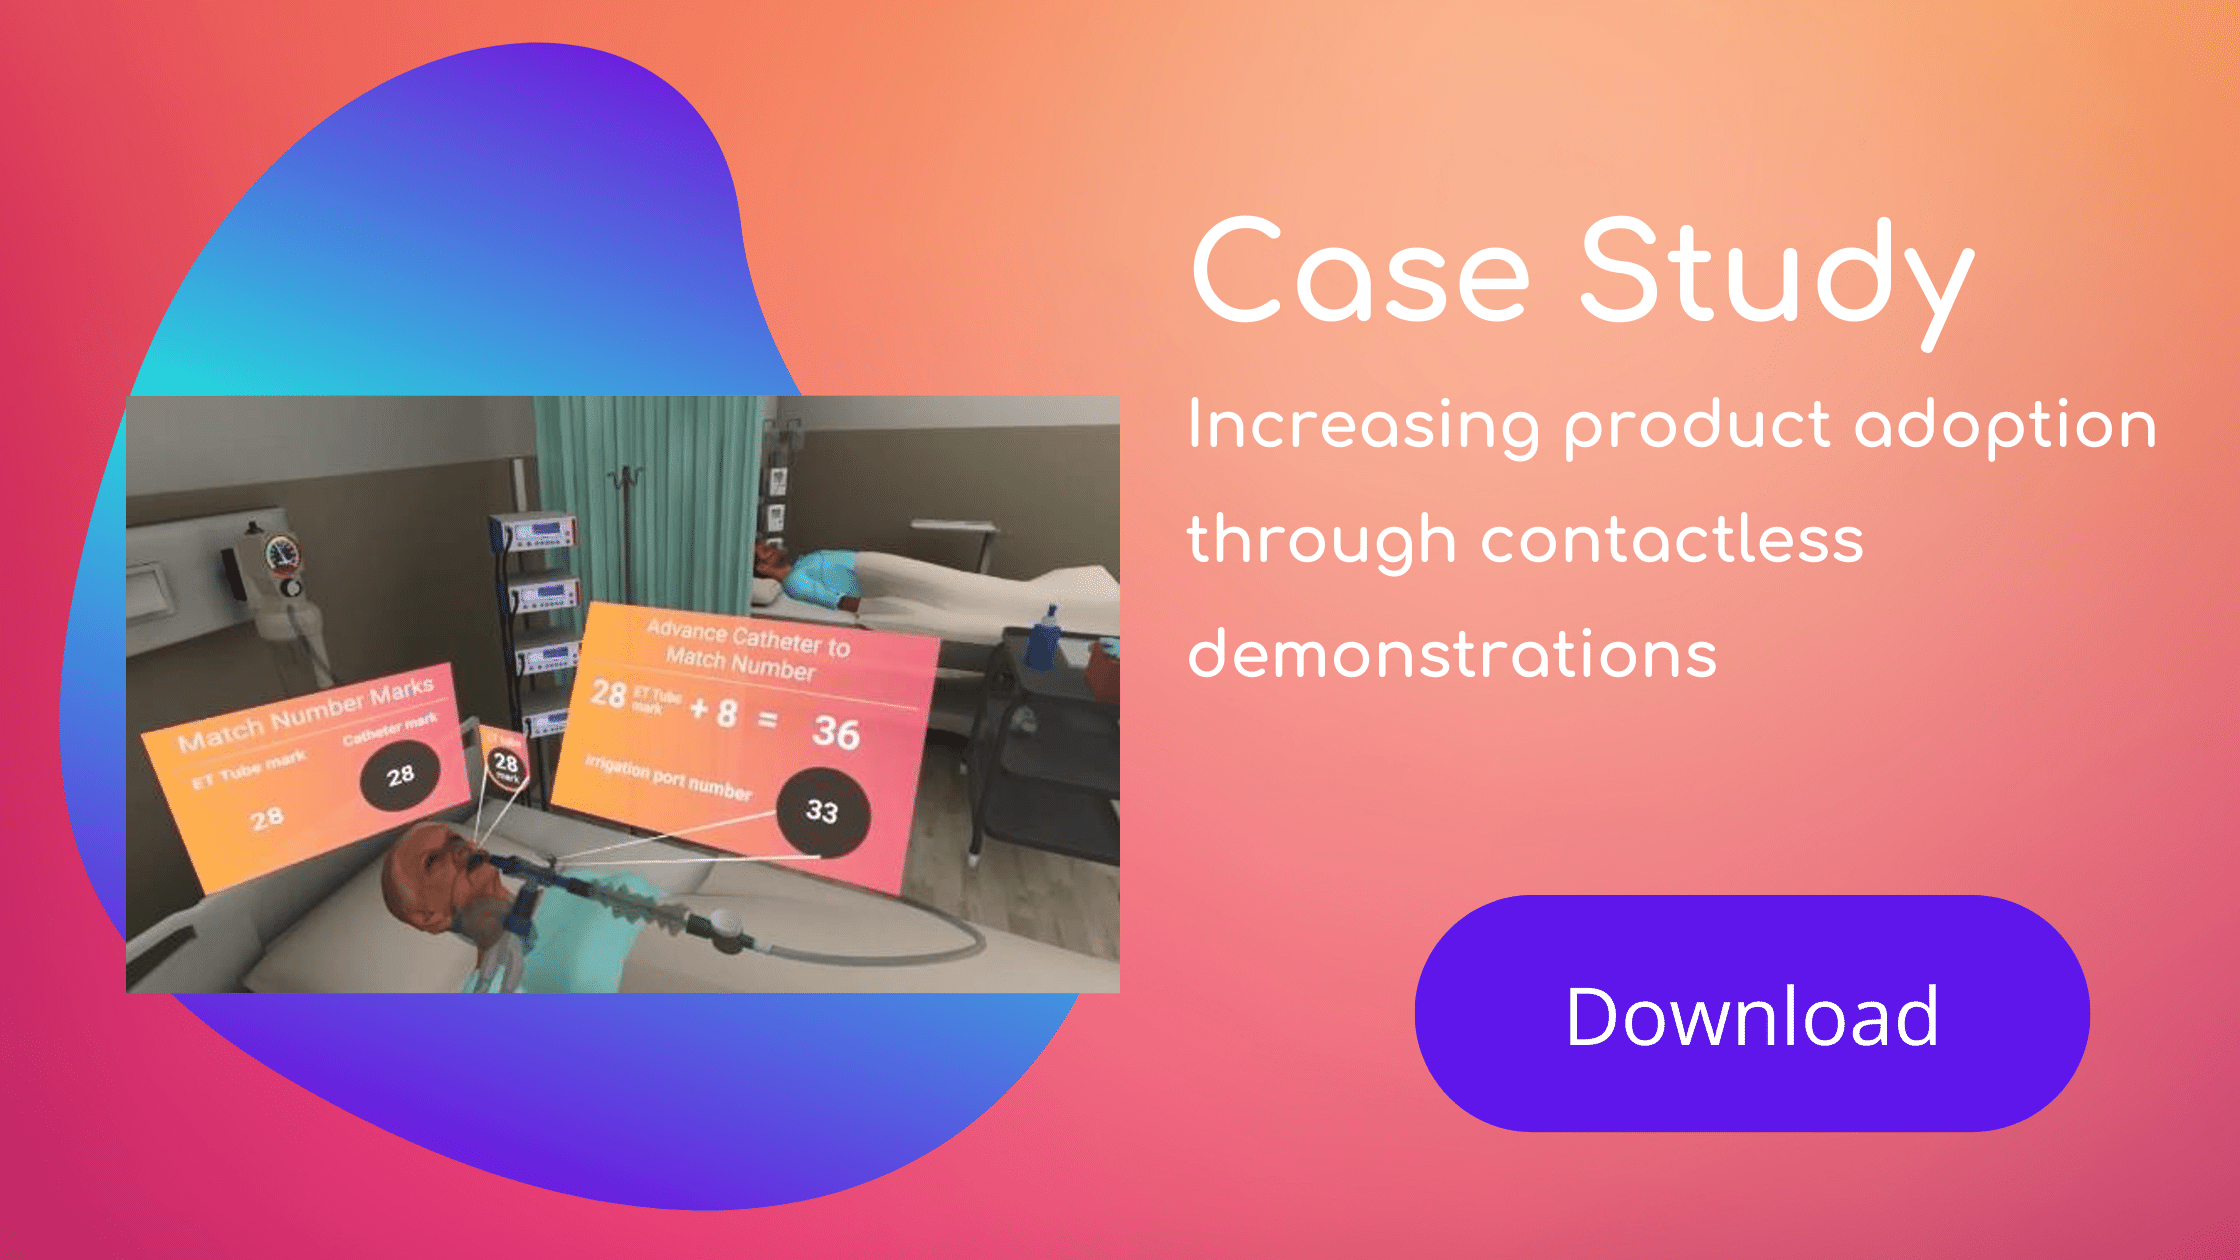 Increasing product adoption through contactless demonstrations